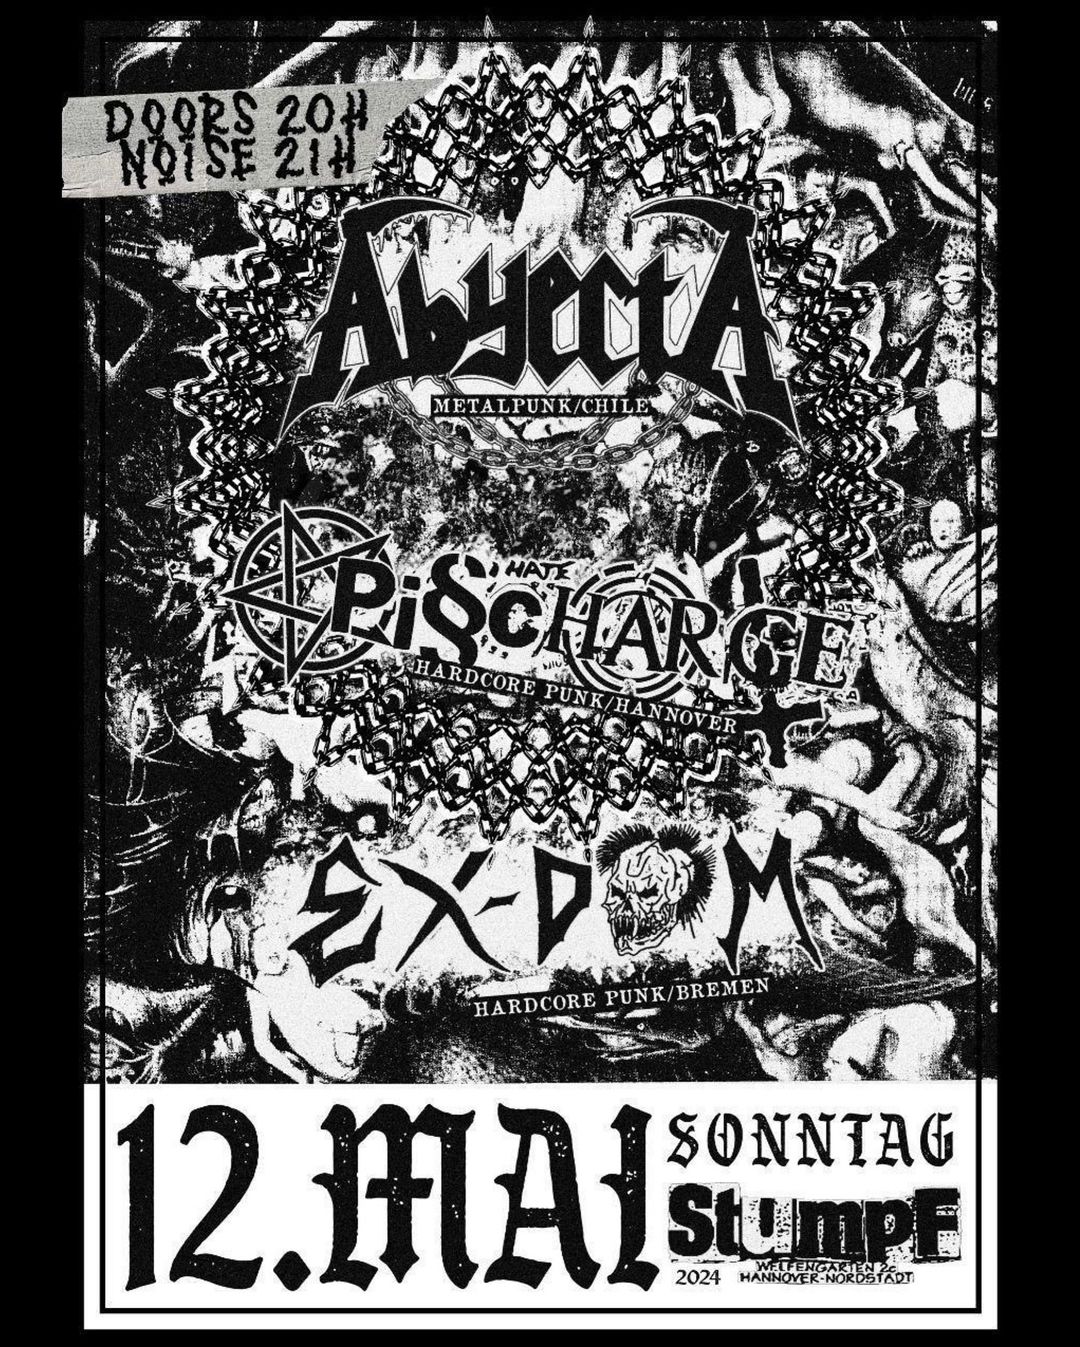 Abyecta + Pisscharge + EX-DOM